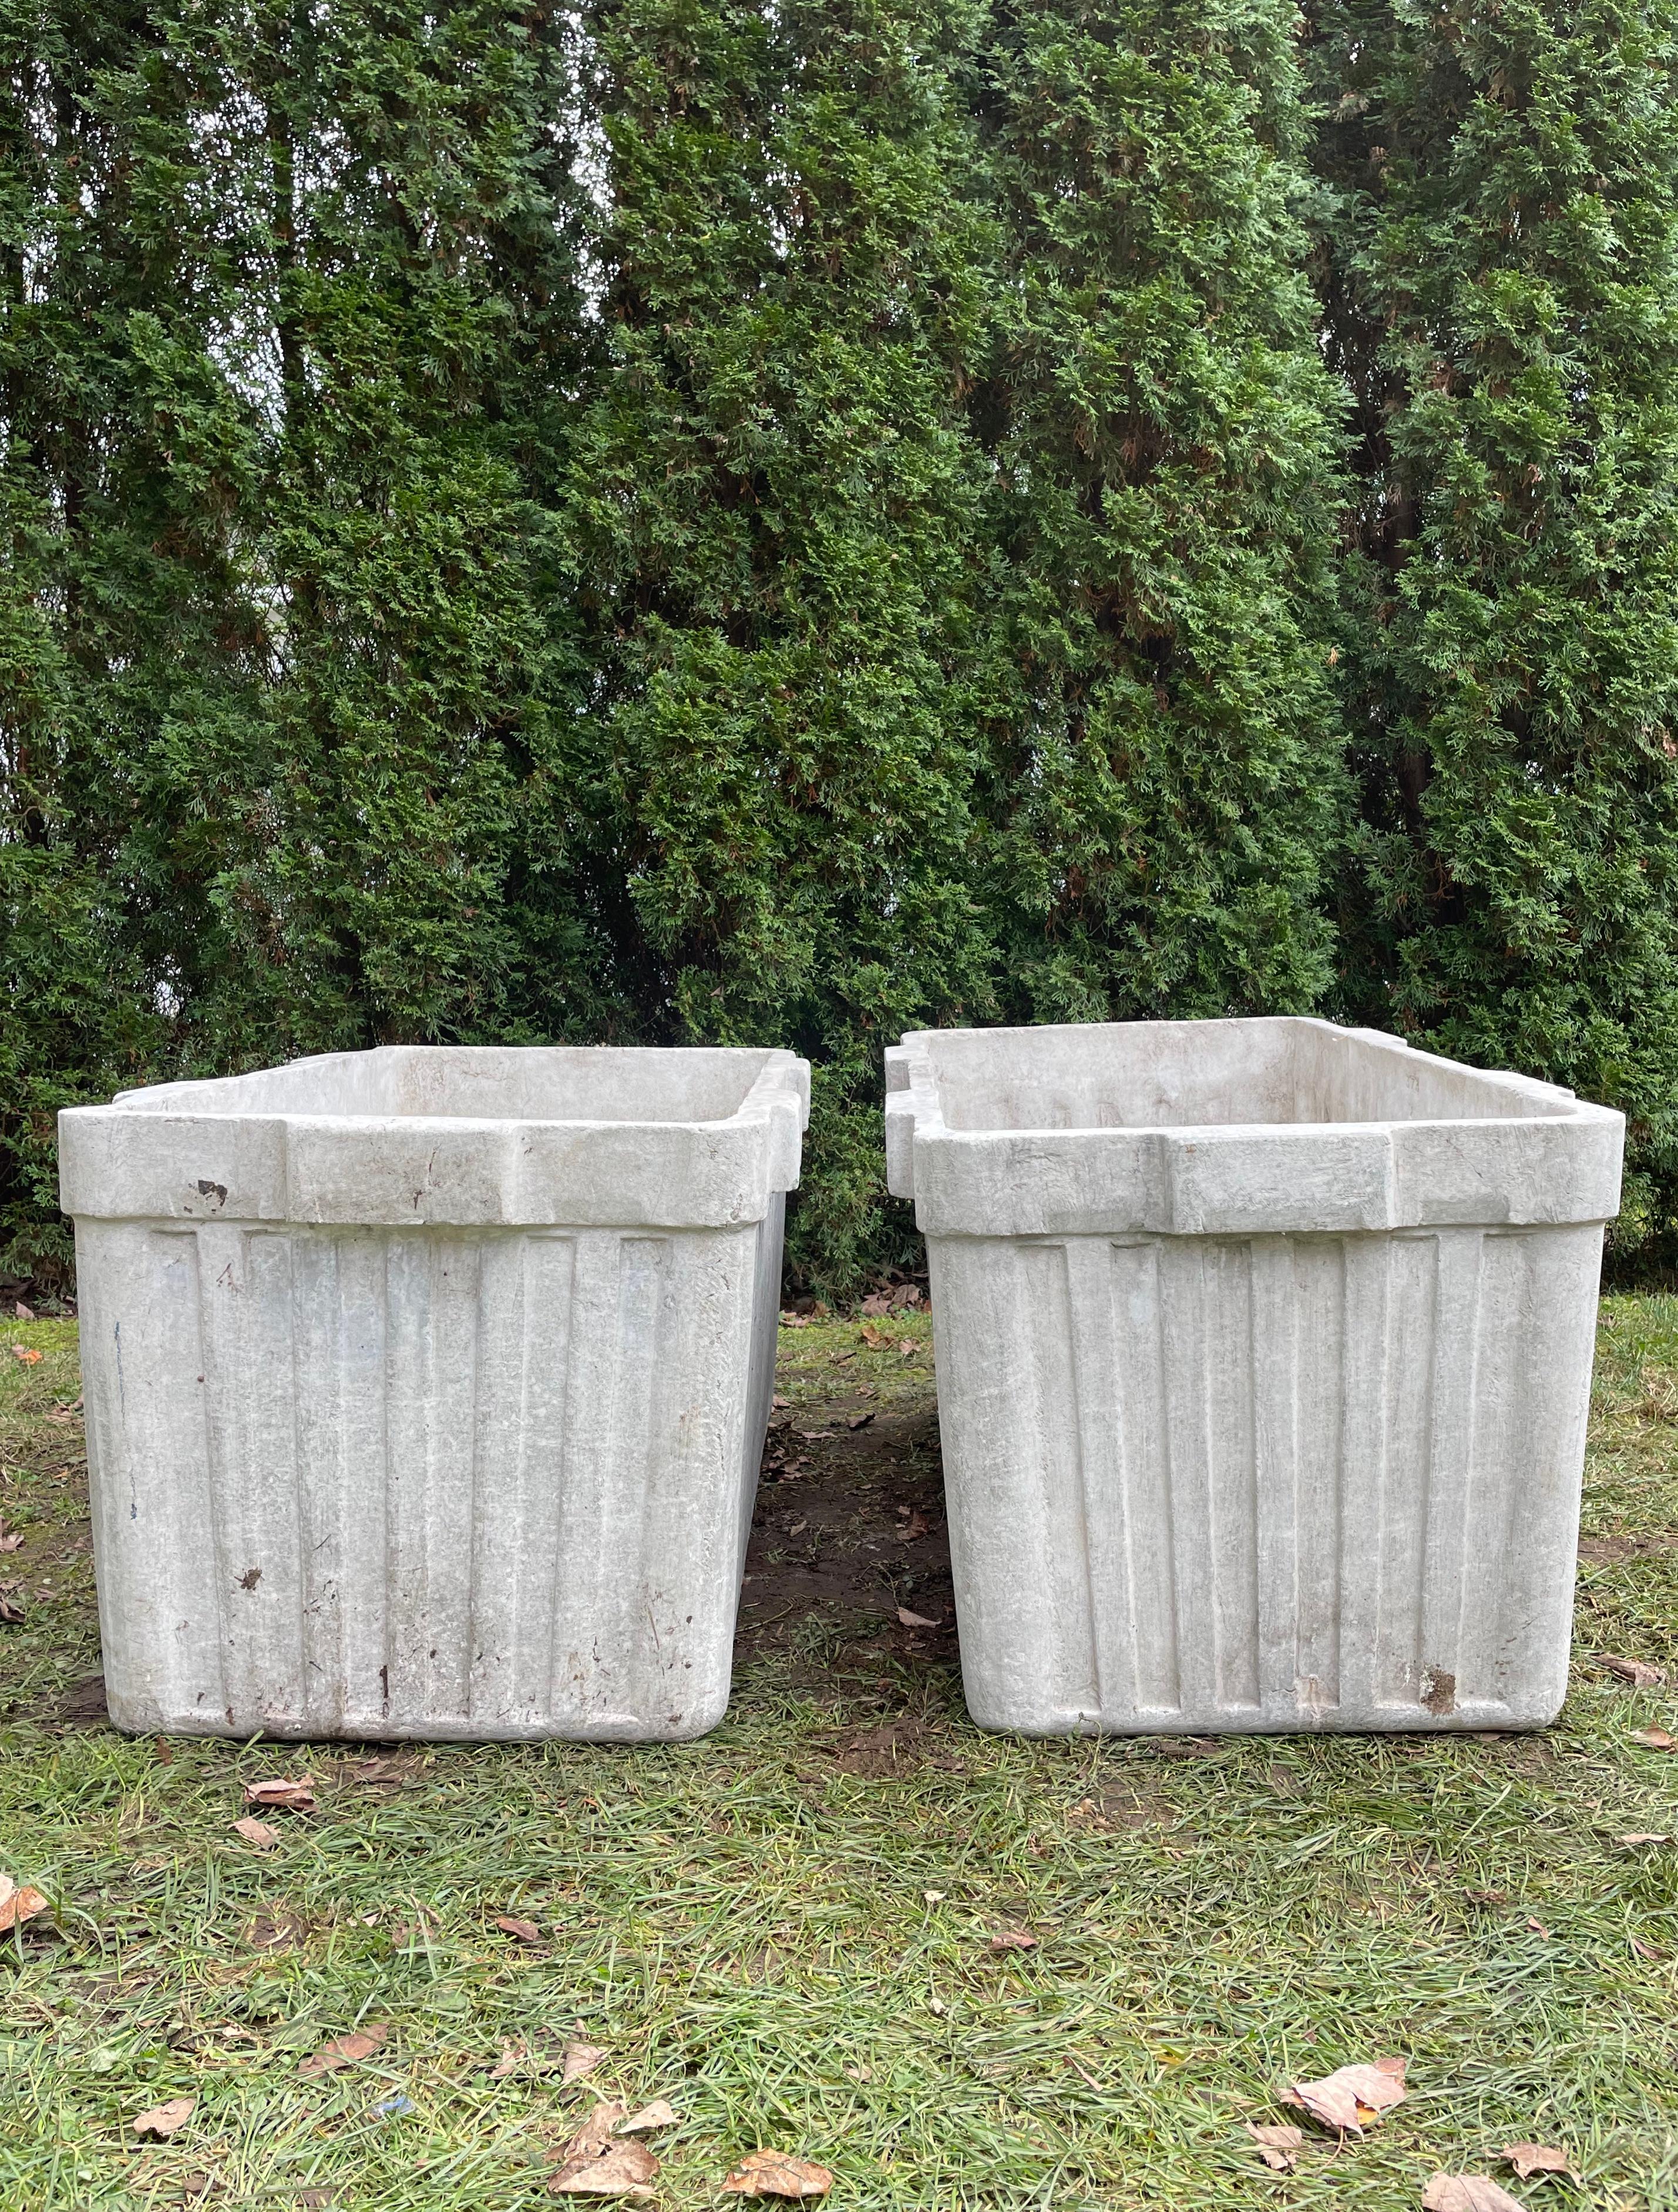 These very large rectangular ribbed planters with integral handles on two sides were designed by the iconic Willy Guhl and produced by Eternit of Switzerland. In excellent condition, they feature a lightly-patinated natural (unpainted) surface and